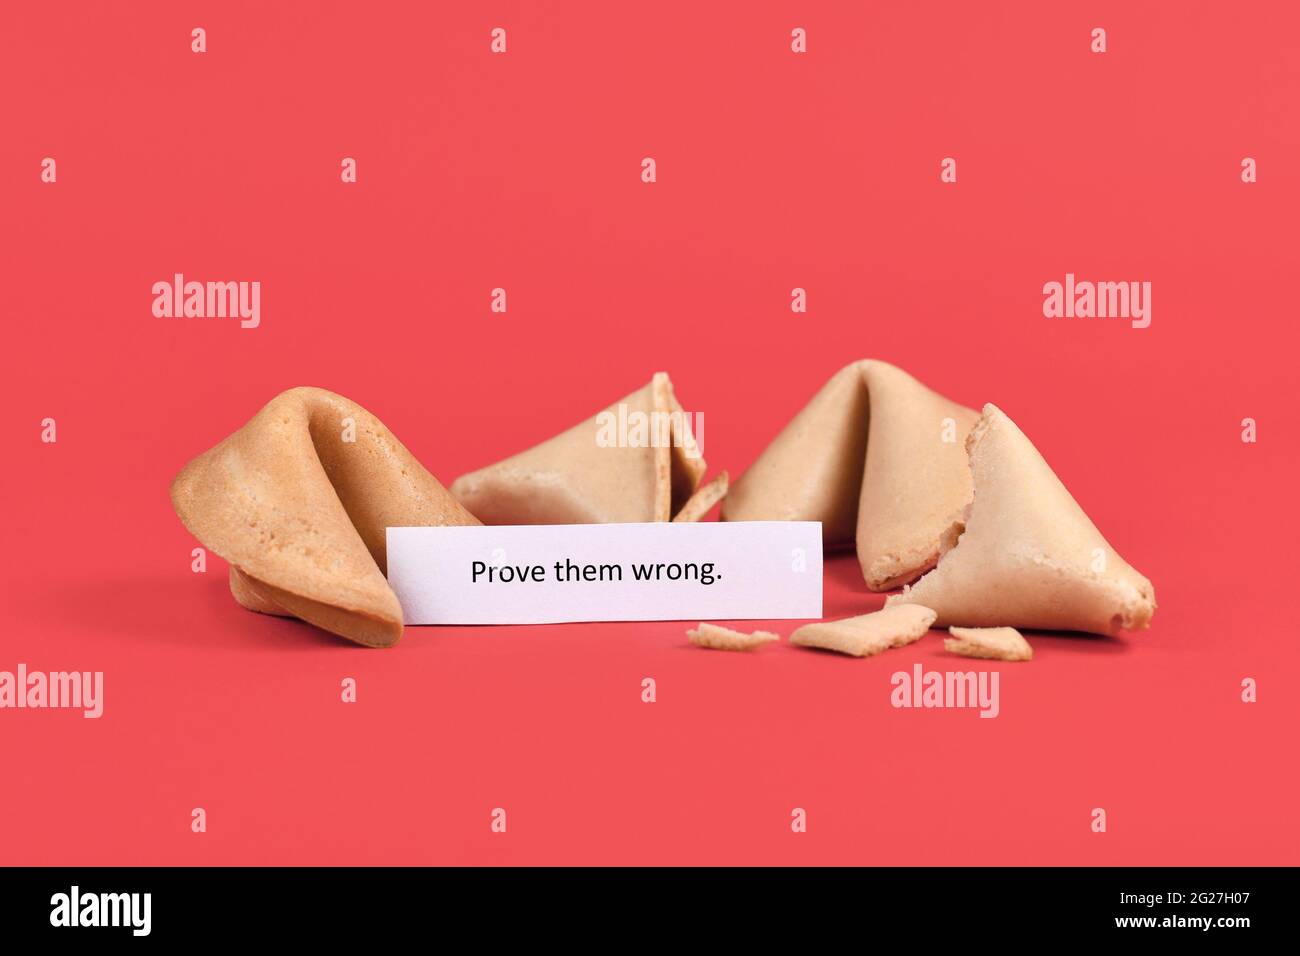 Fortune cookies with motivational text saying 'Prove them wrong' on red background Stock Photo